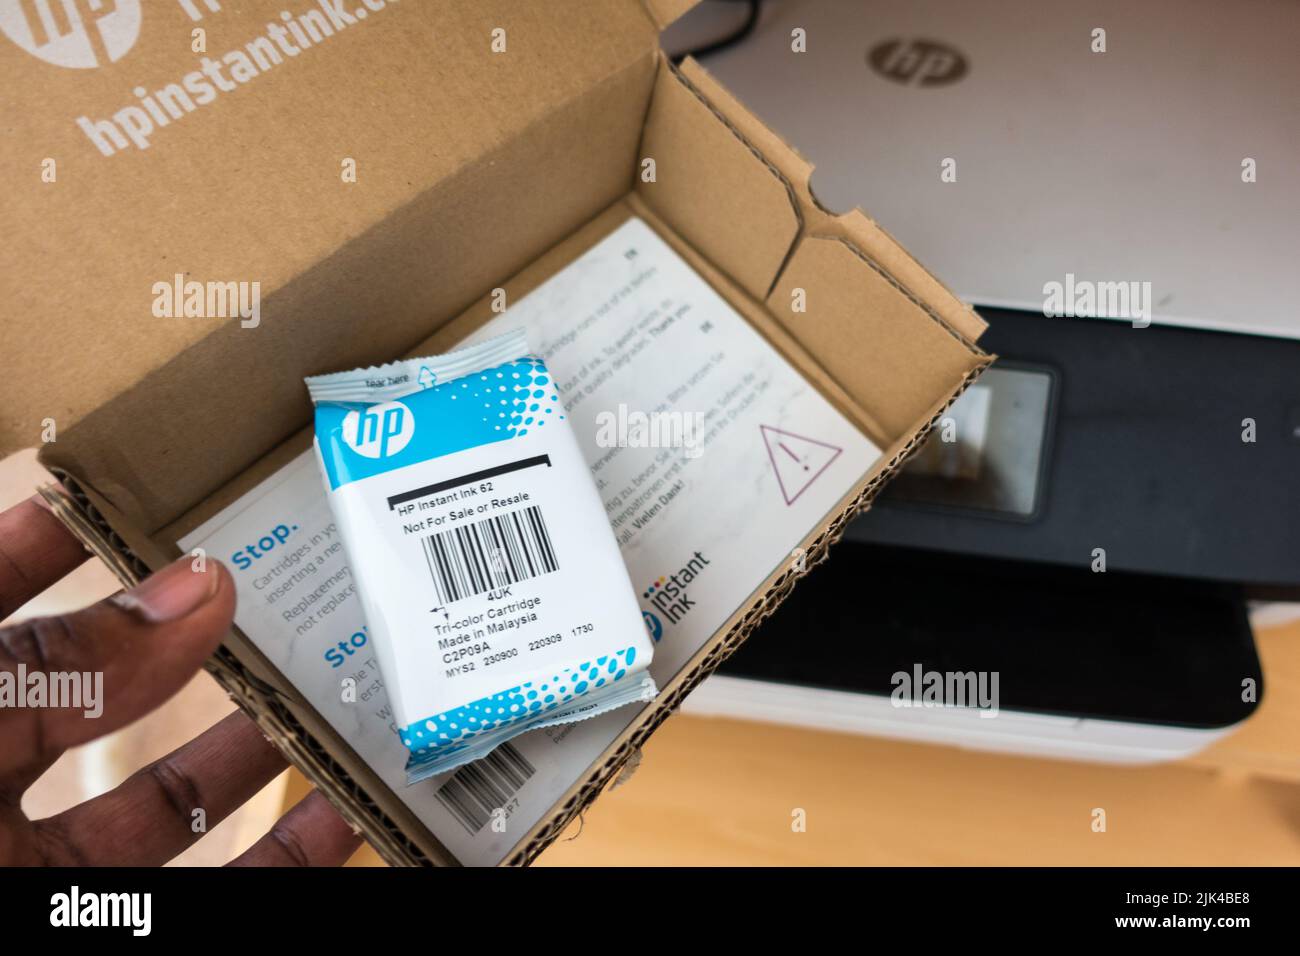 HP ink delivered in cardboard package as part of subscription printing Stock Photo